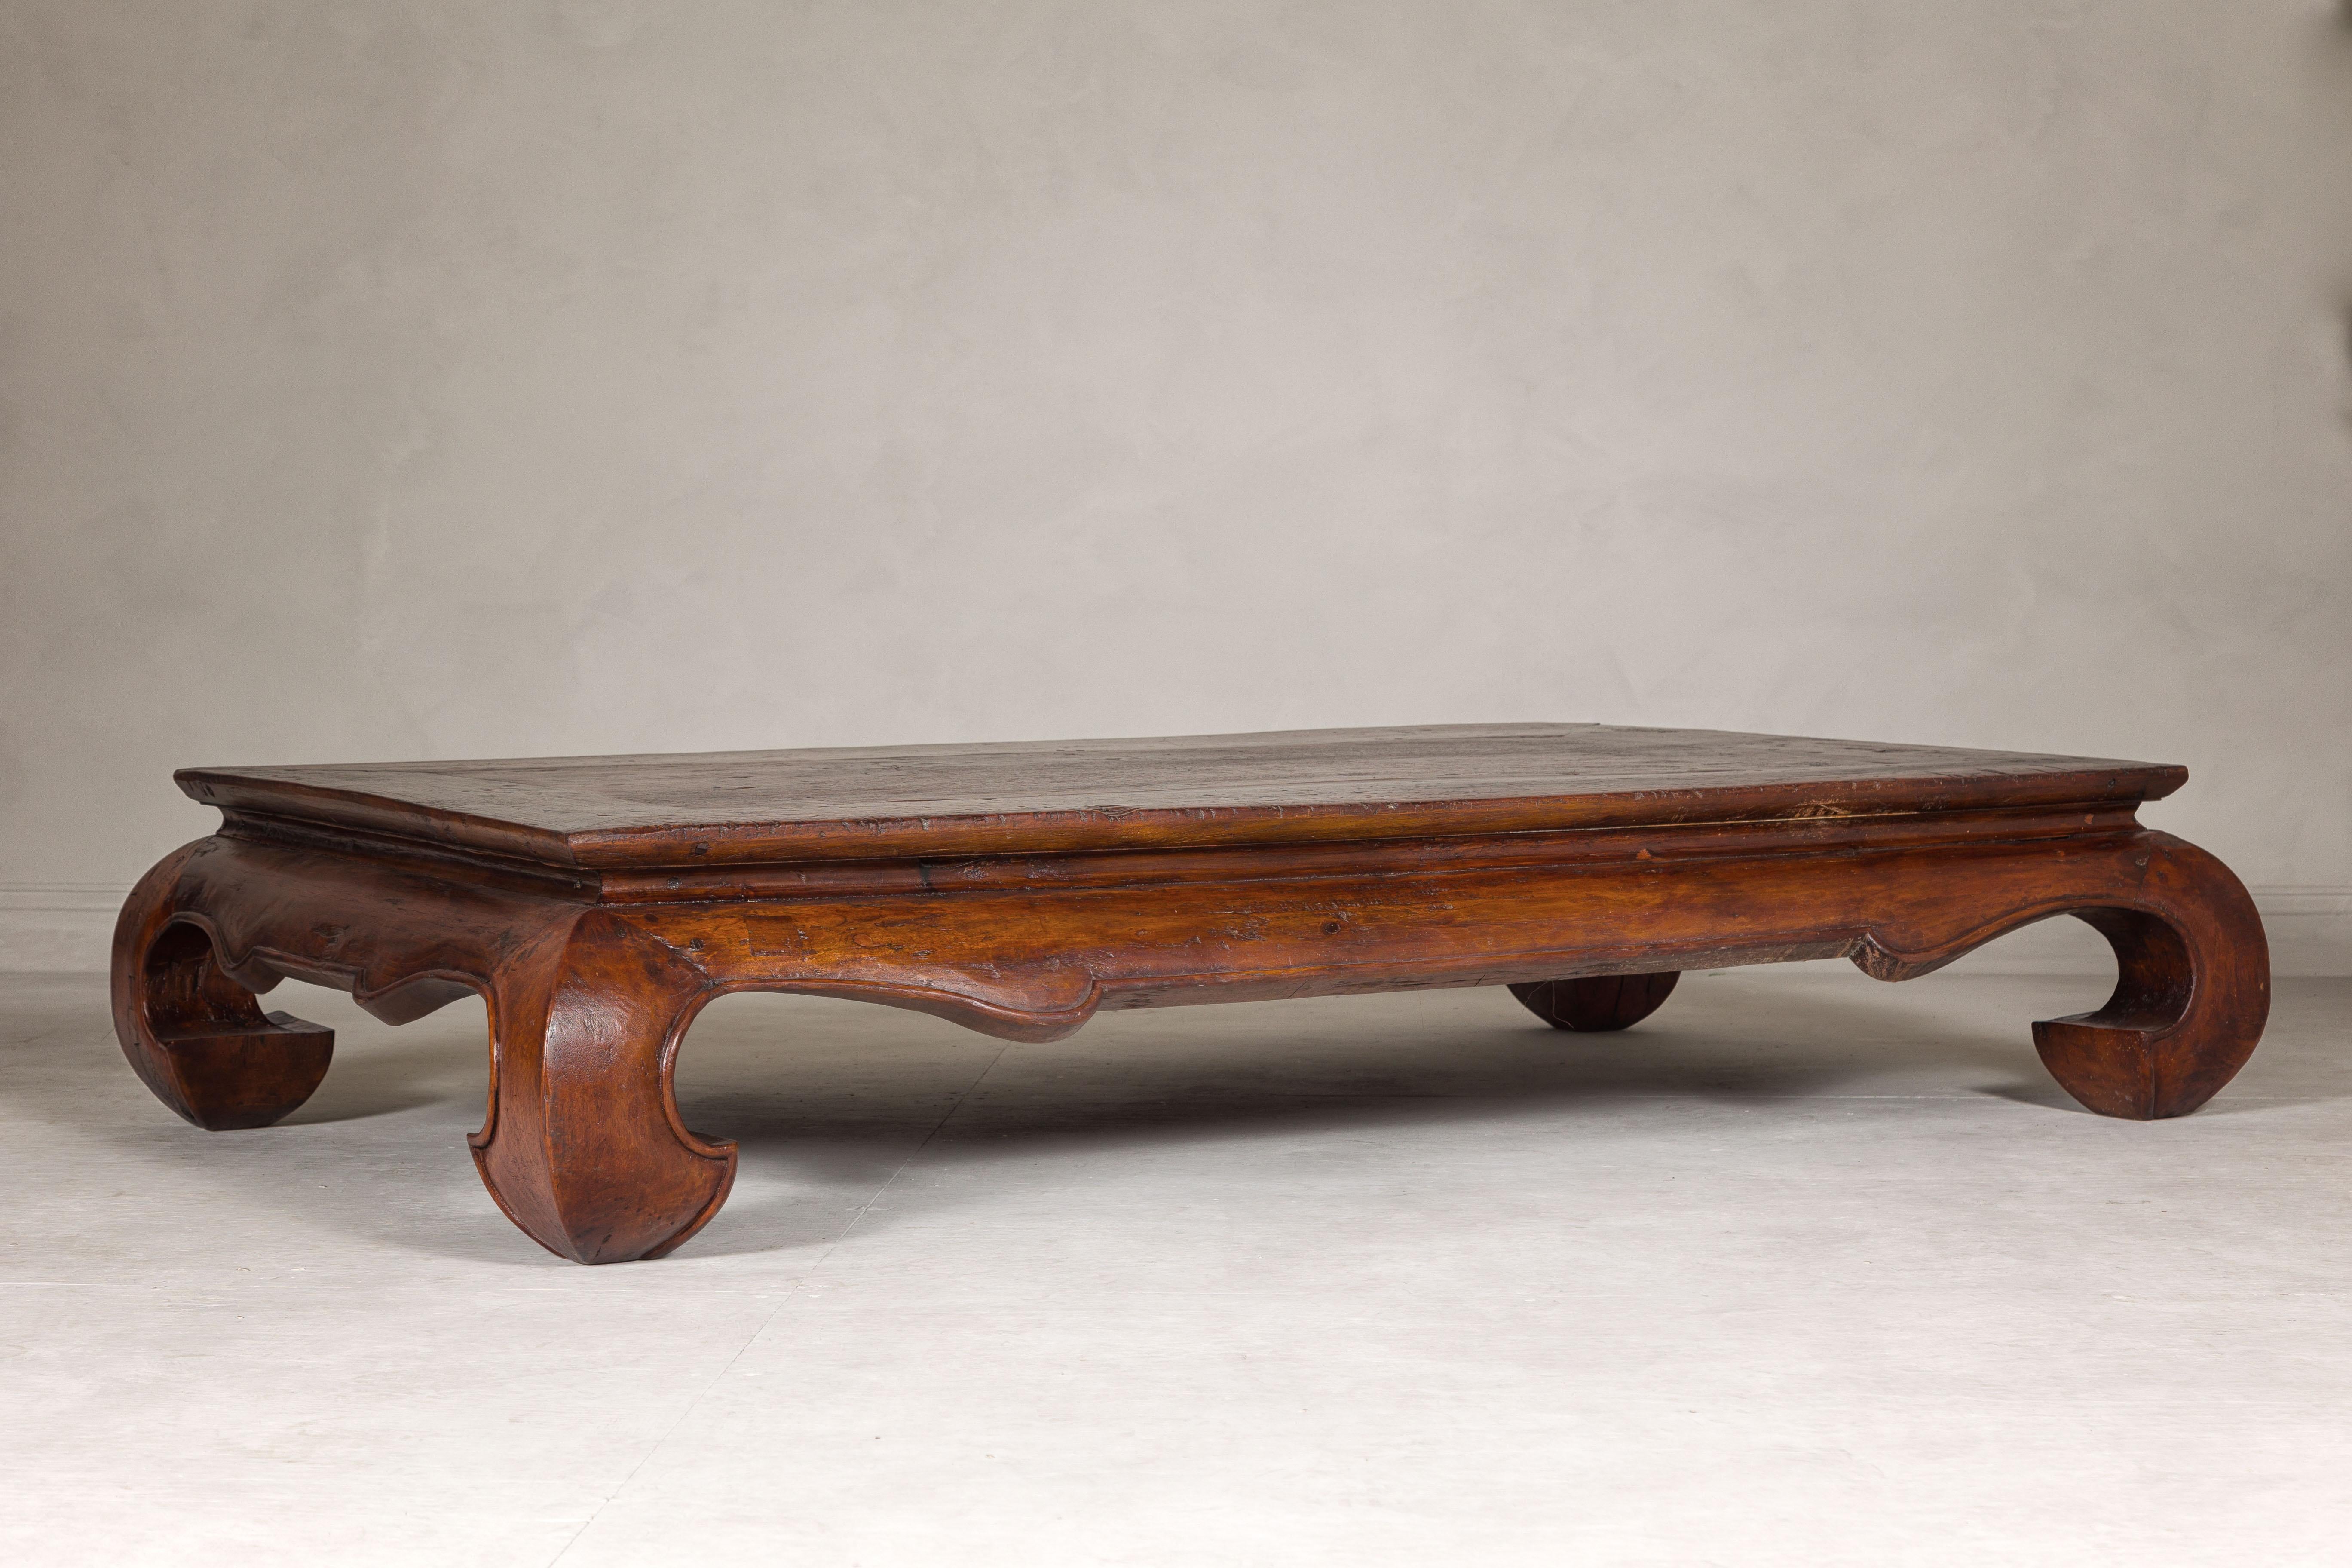 Qing Dynasty 19th Century Chow Leg Kang Table with Weathered Rustic Patina For Sale 4